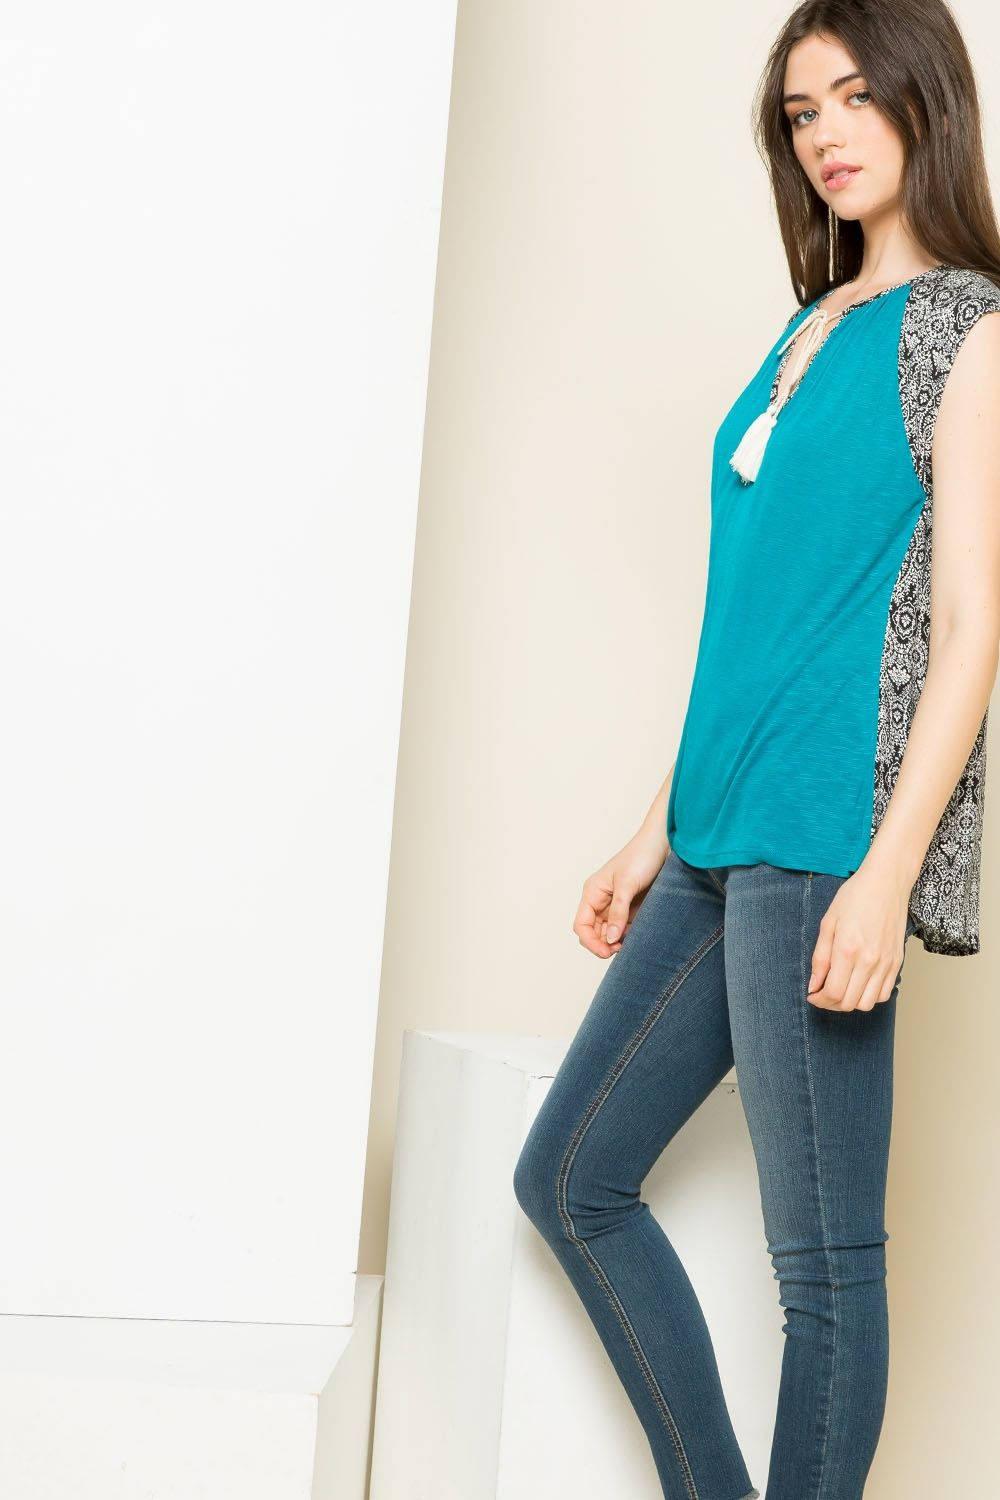 THML Teal Contrast Back Top - Strawberry Moon Boutique